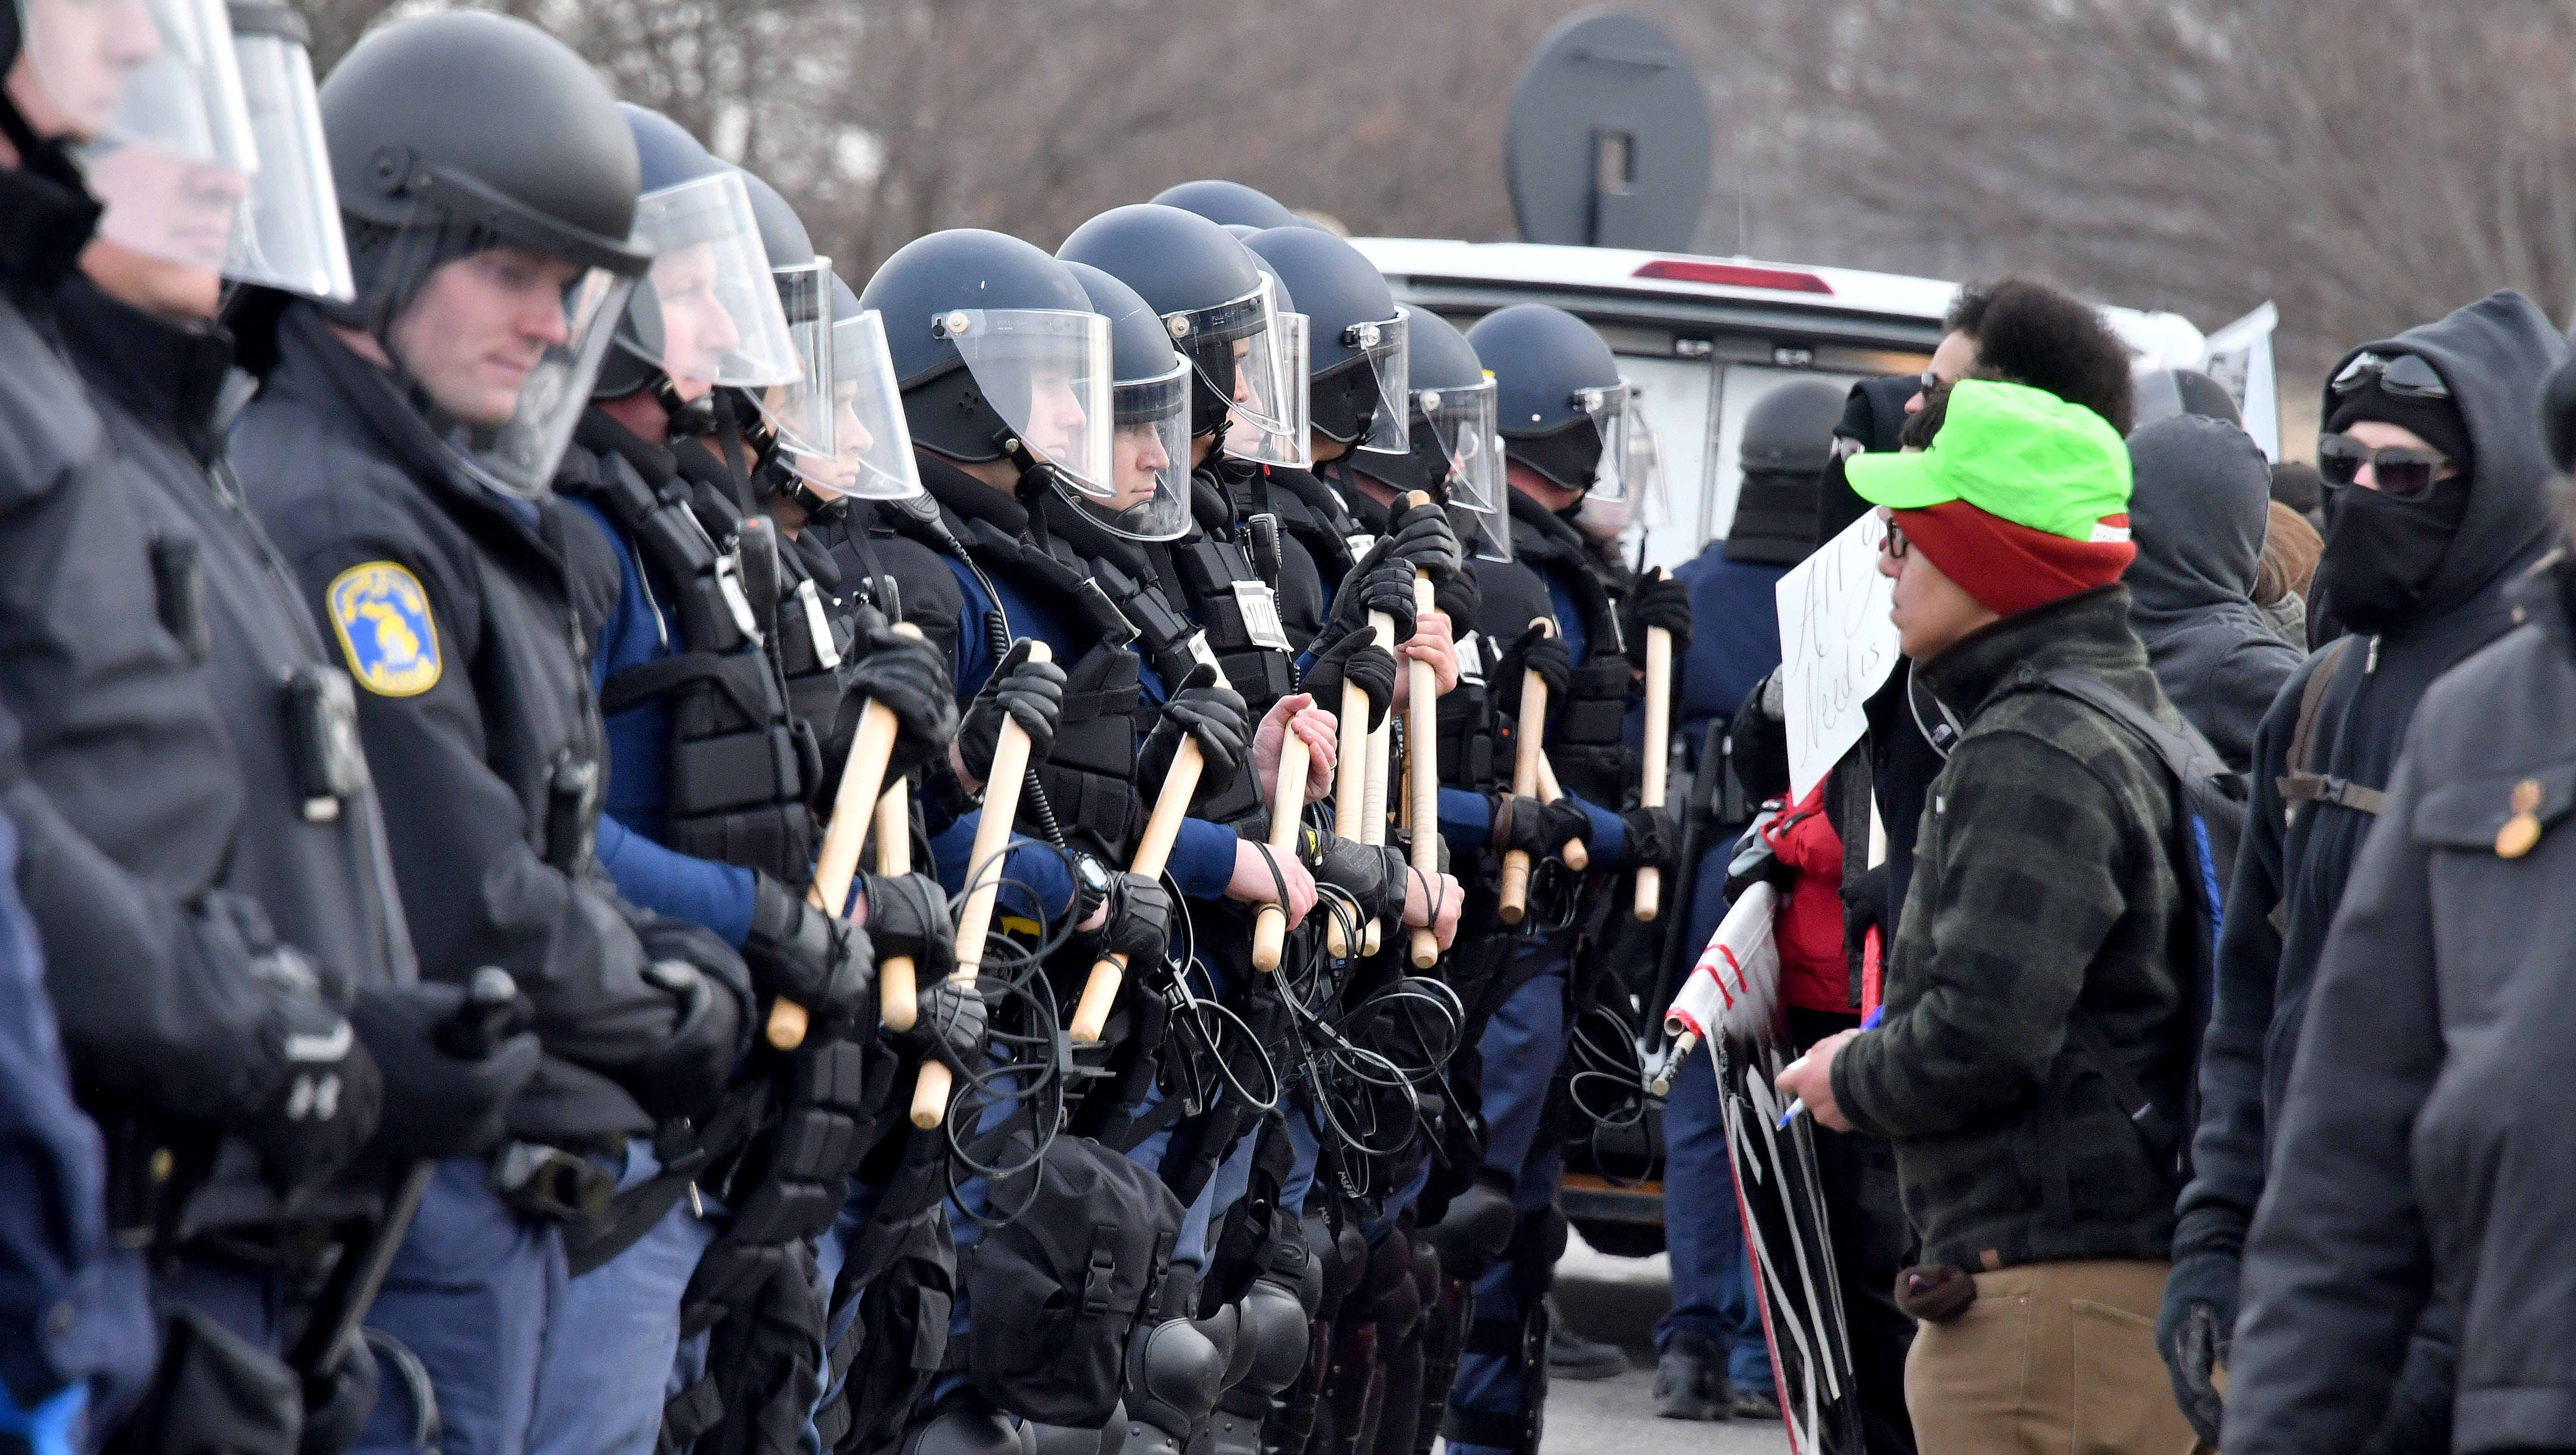 A protester taunts a line of police officers in riot gear.